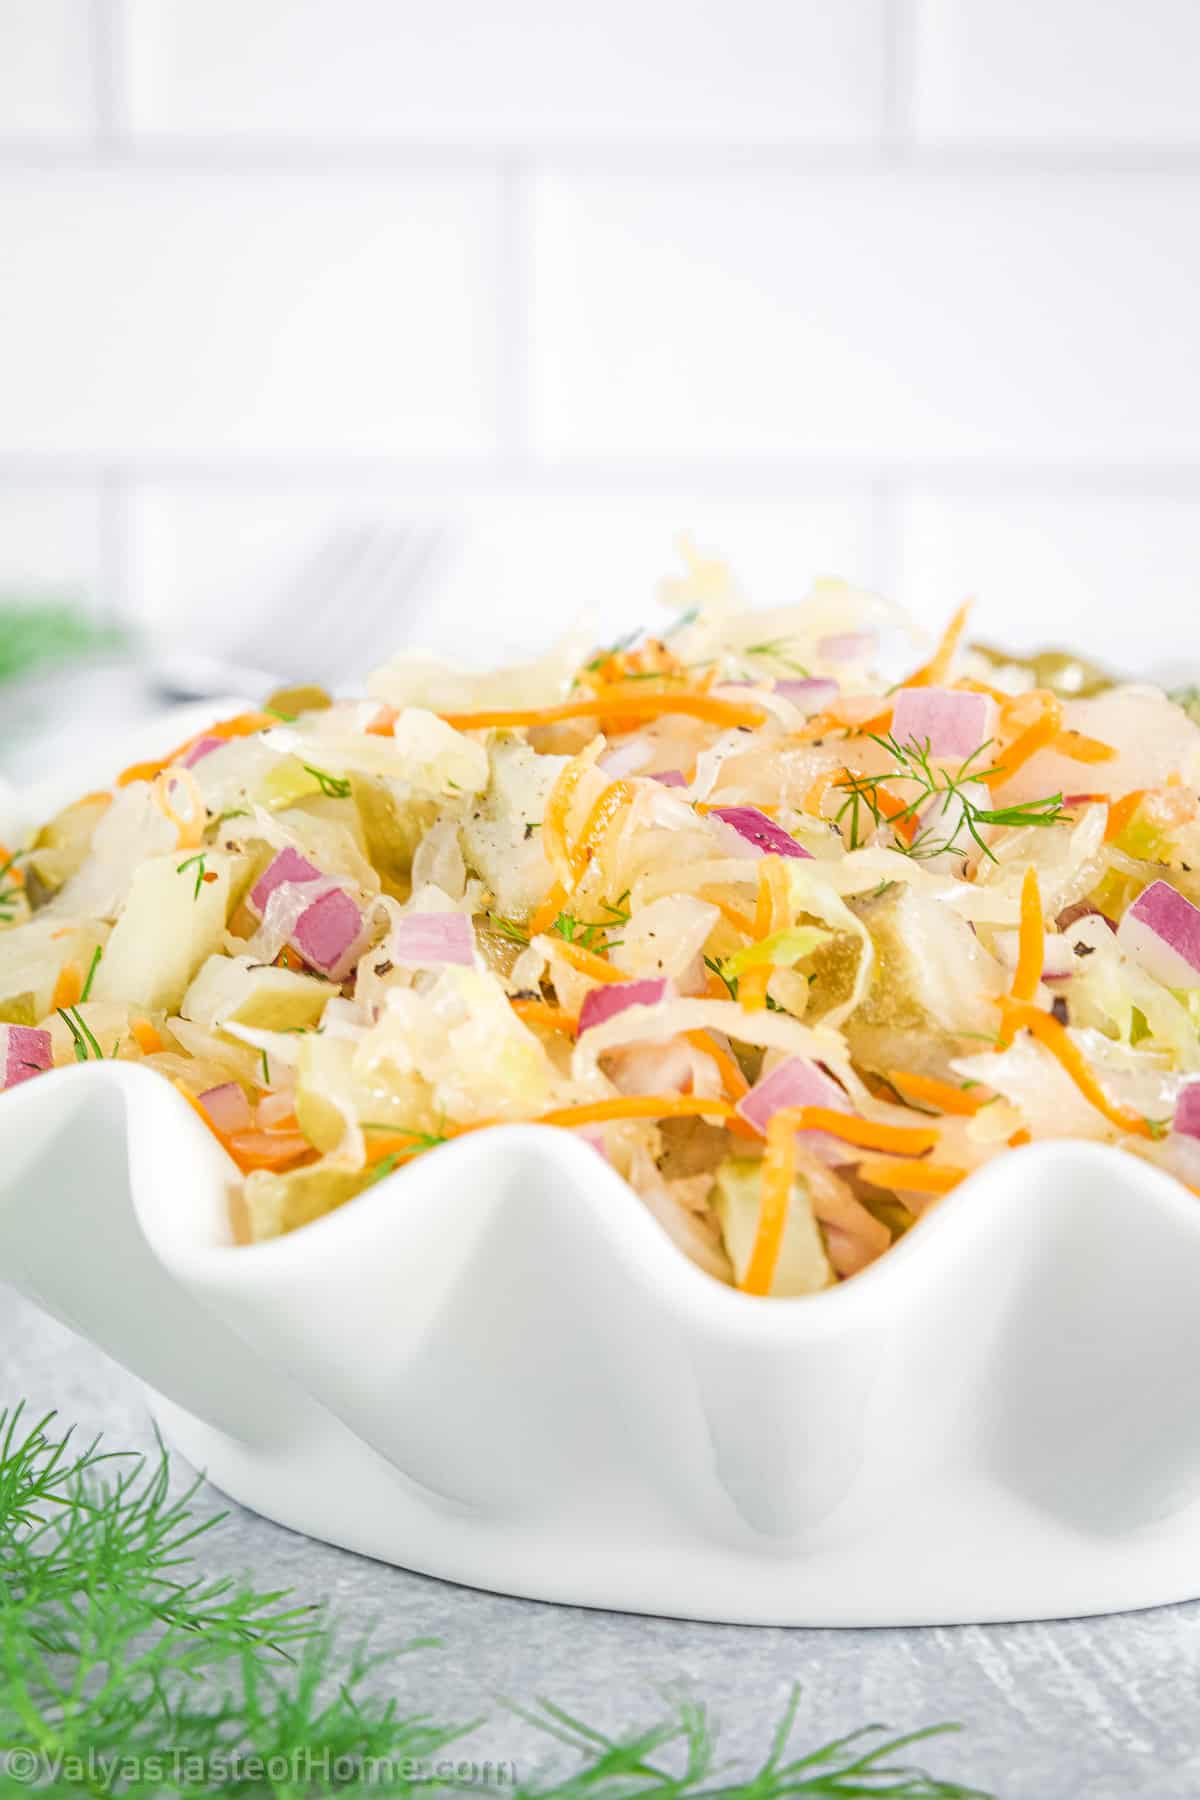 Sauerkraut salad is a deliciously tangy and vibrant dish that you’re going to fall in love with. 